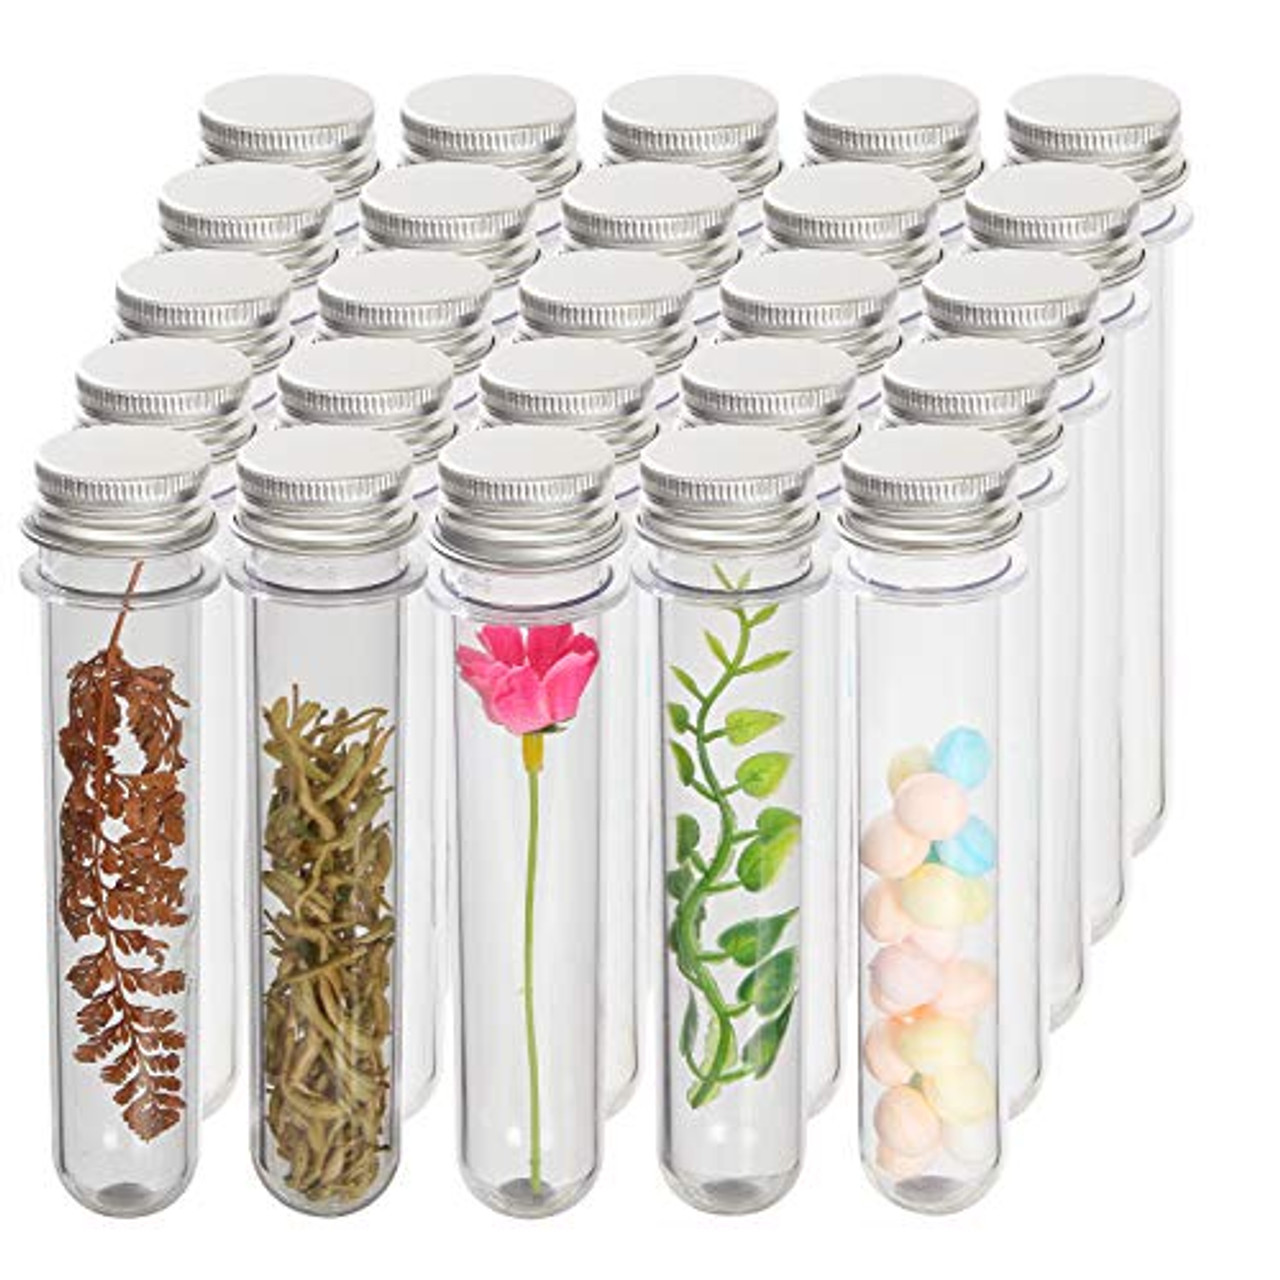 60Pack Plastic Test Tubes with Caps, 45ml Clear Bath Salt Tubes Gumball Candy Tubes, Tube Container Vials for Scientific Experiments, Party Favors